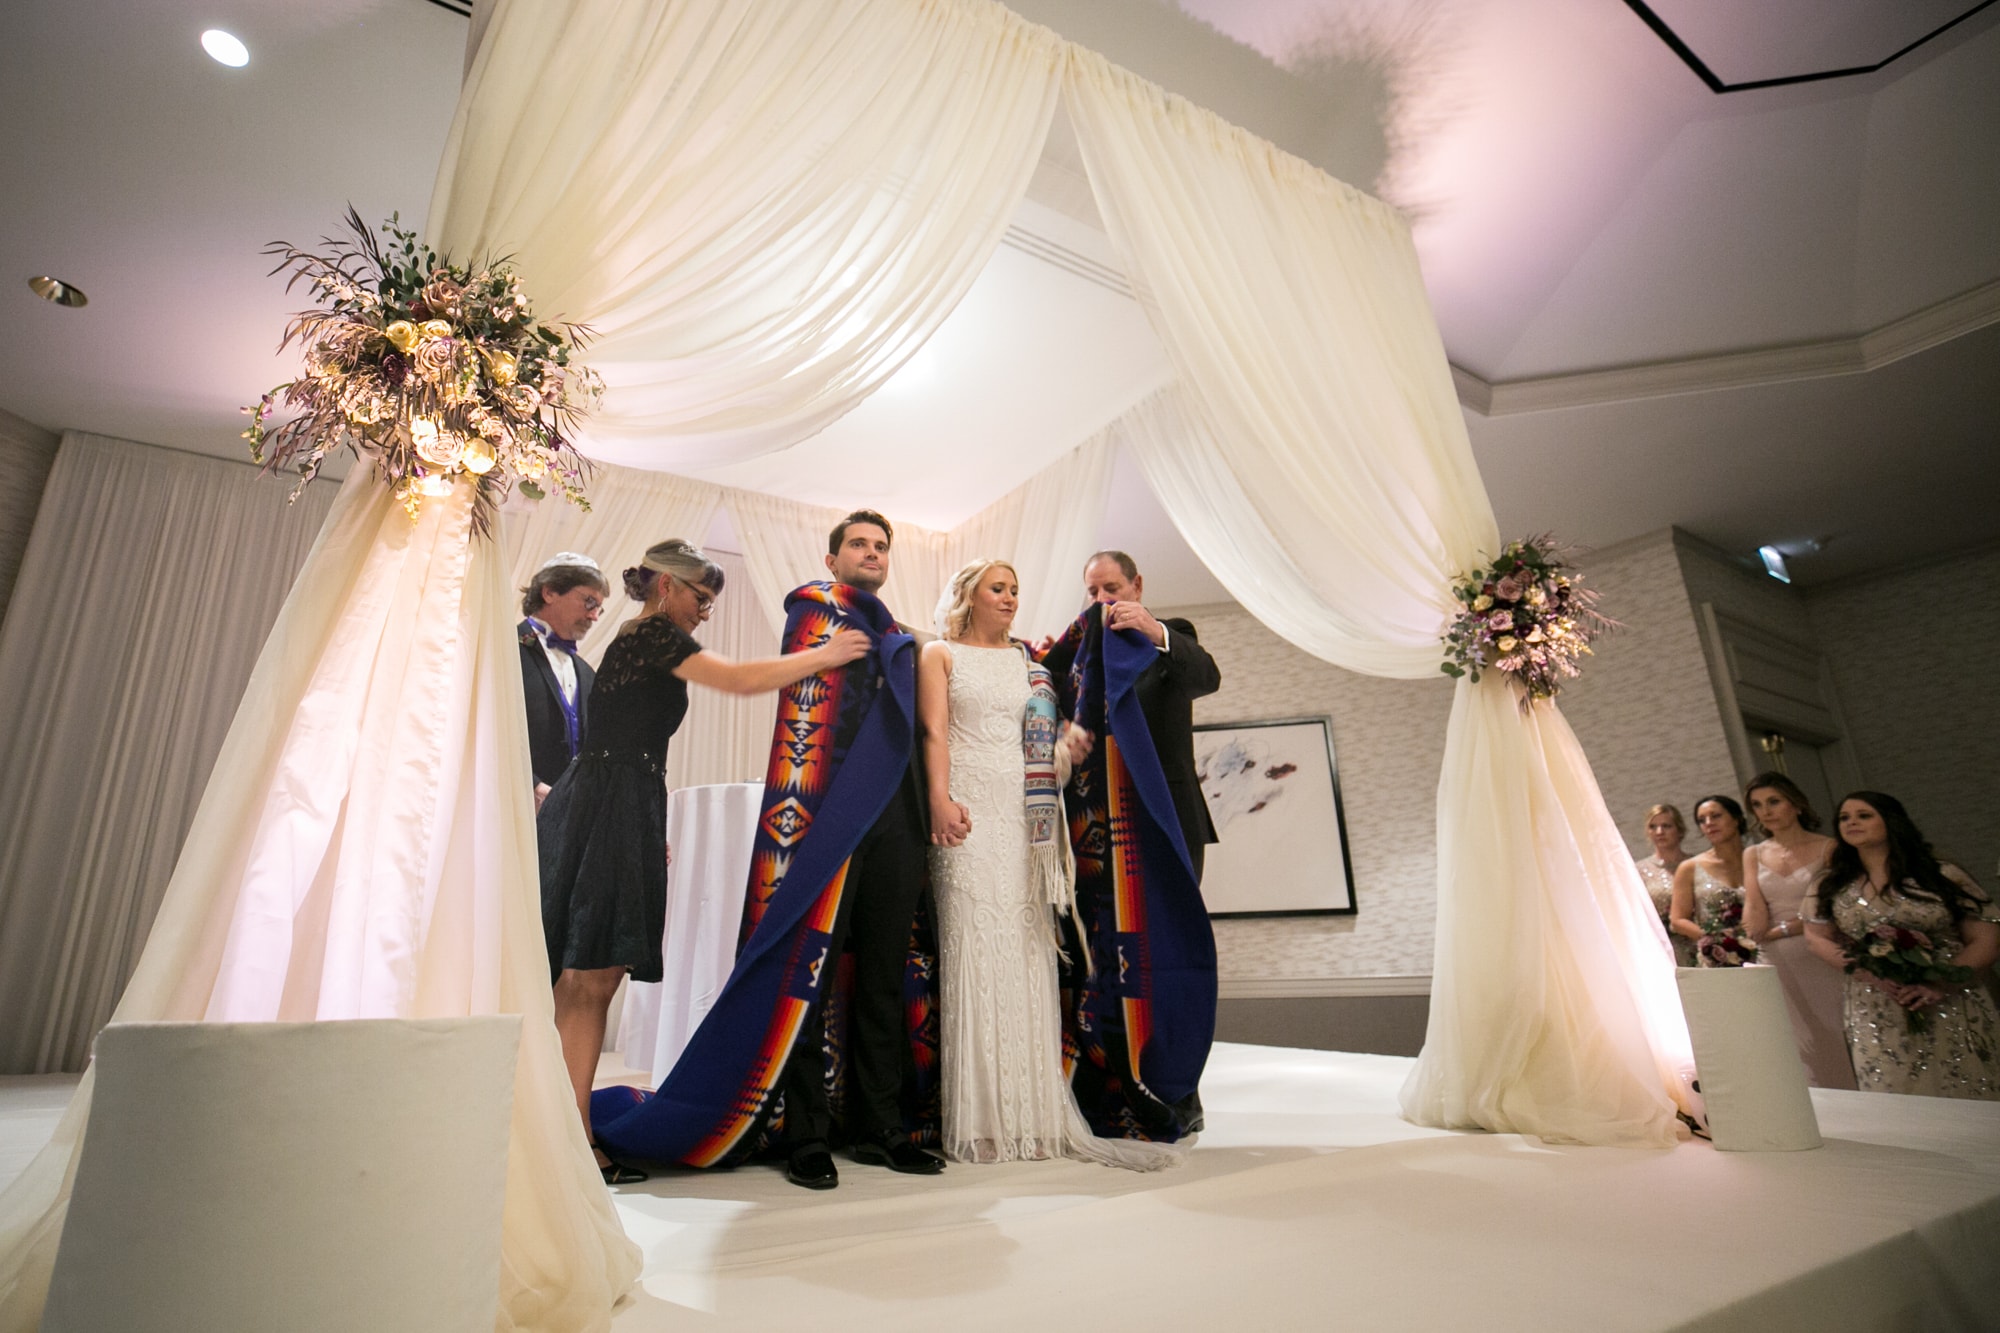 Announcing Bride and Groom at Jewish Wedding Ceremony